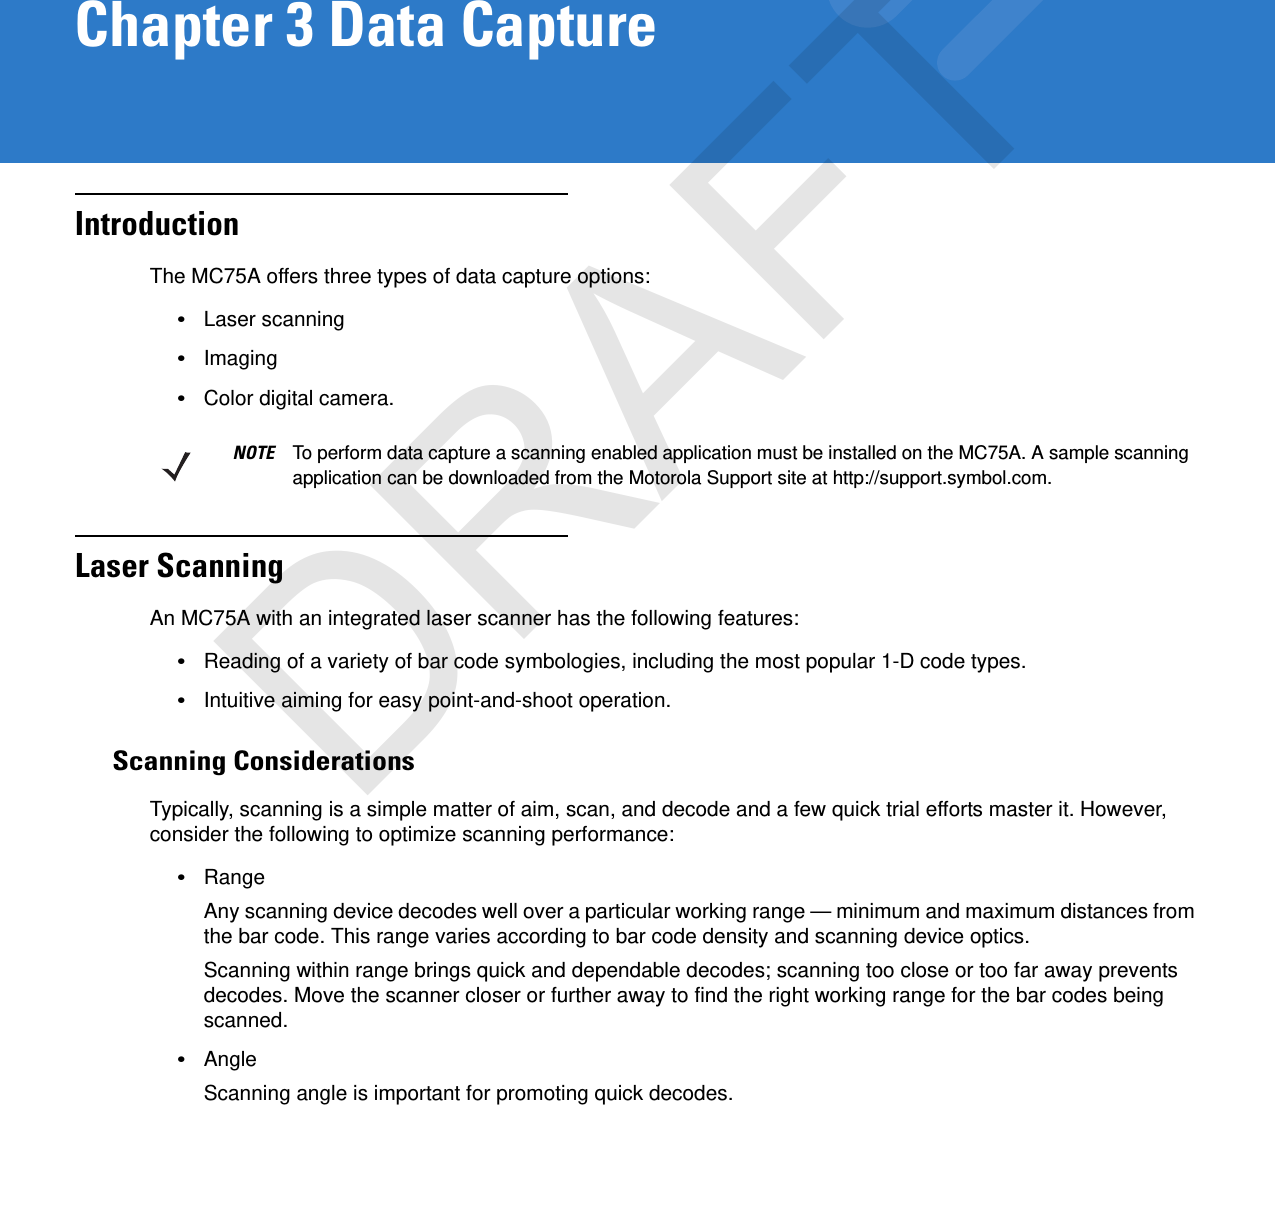 Chapter 3 Data CaptureIntroductionThe MC75A offers three types of data capture options:•Laser scanning•Imaging•Color digital camera.Laser ScanningAn MC75A with an integrated laser scanner has the following features:•Reading of a variety of bar code symbologies, including the most popular 1-D code types. •Intuitive aiming for easy point-and-shoot operation.Scanning ConsiderationsTypically, scanning is a simple matter of aim, scan, and decode and a few quick trial efforts master it. However, consider the following to optimize scanning performance:•RangeAny scanning device decodes well over a particular working range — minimum and maximum distances from the bar code. This range varies according to bar code density and scanning device optics.Scanning within range brings quick and dependable decodes; scanning too close or too far away prevents decodes. Move the scanner closer or further away to find the right working range for the bar codes being scanned. •AngleScanning angle is important for promoting quick decodes.NOTE To perform data capture a scanning enabled application must be installed on the MC75A. A sample scanning application can be downloaded from the Motorola Support site at http://support.symbol.com.DRAFT